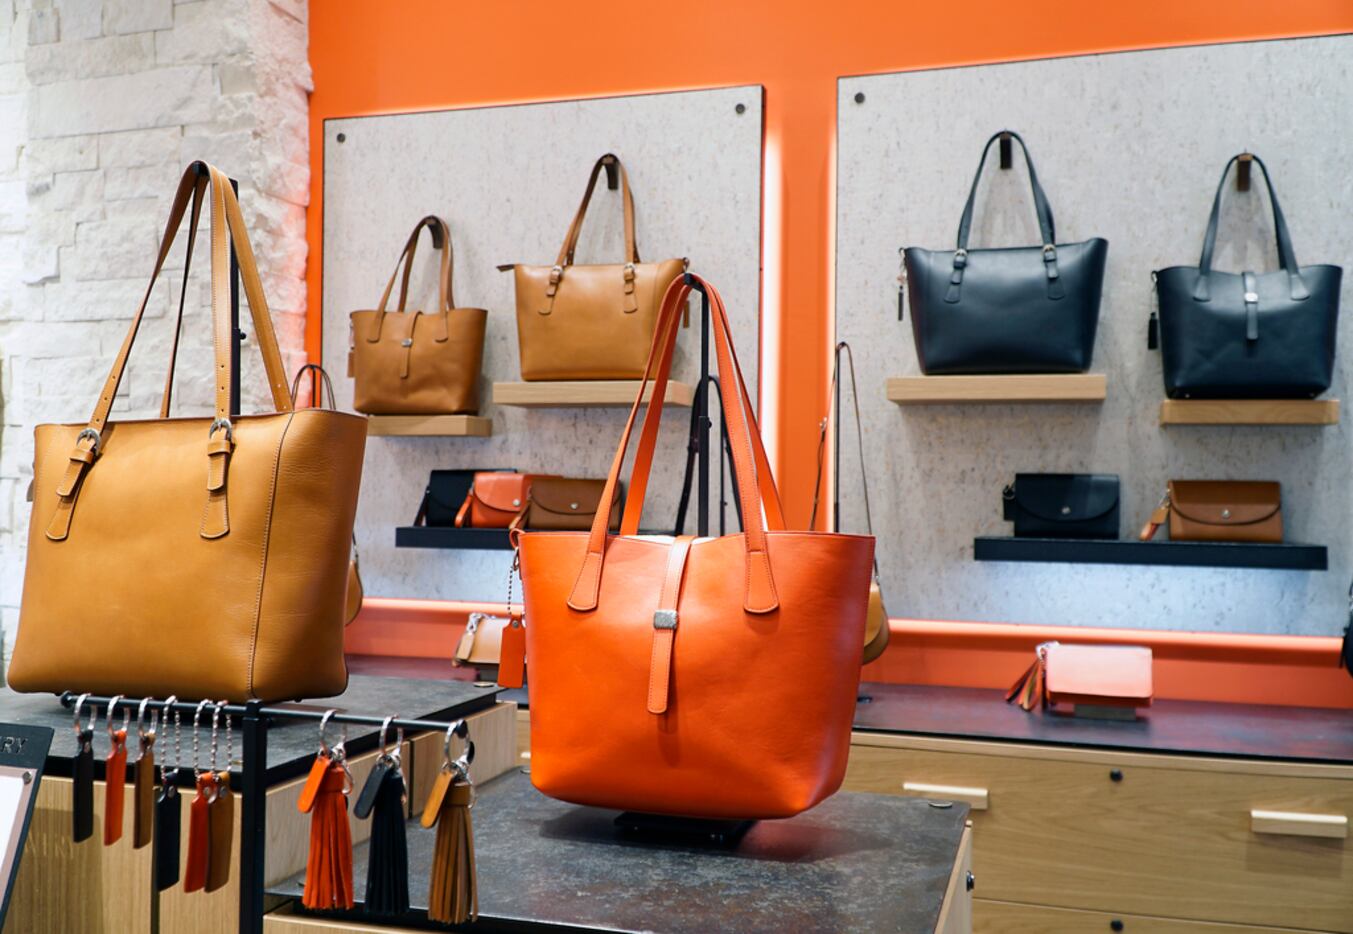 The leather handbags are one of the new products at James Avery at NorthPark Mall in Dallas,...